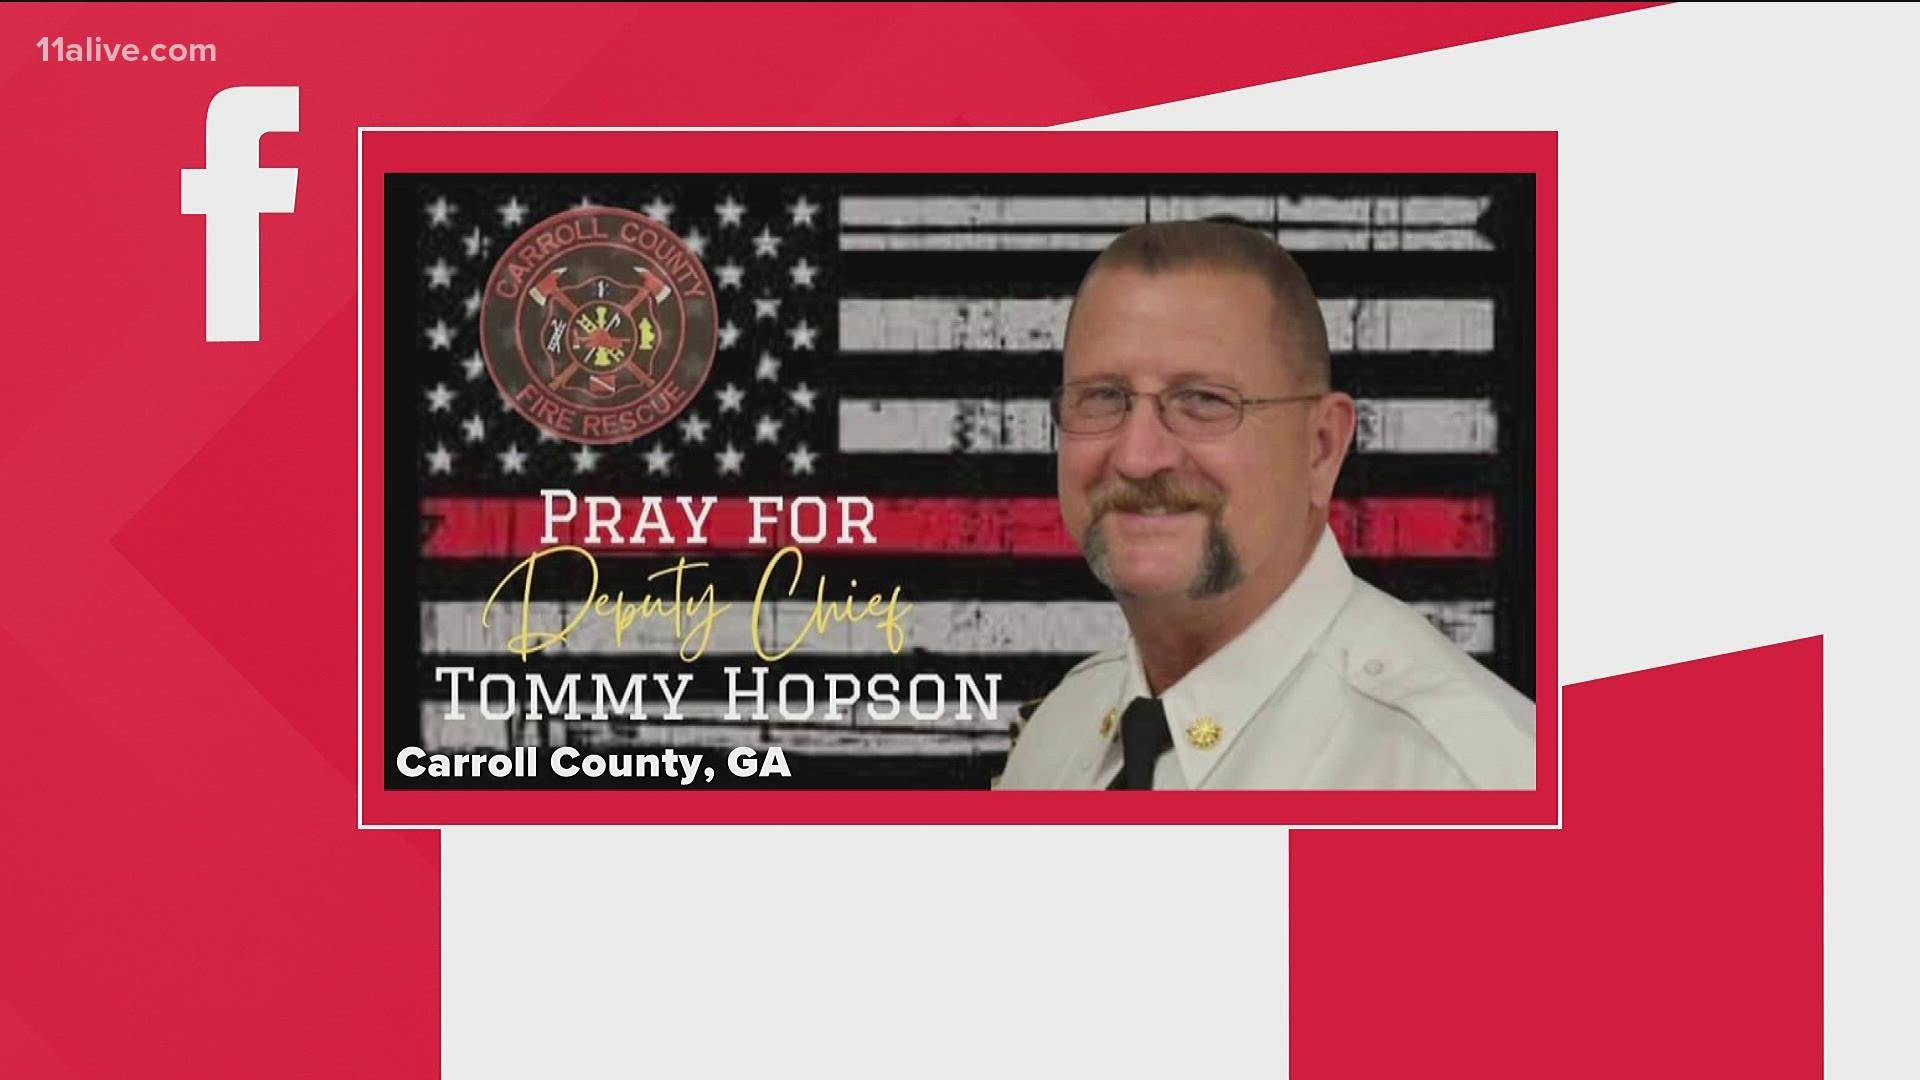 On Facebook, officials said deputy chief Tommy Hopson is making improvements, but he's in the battle of his life.